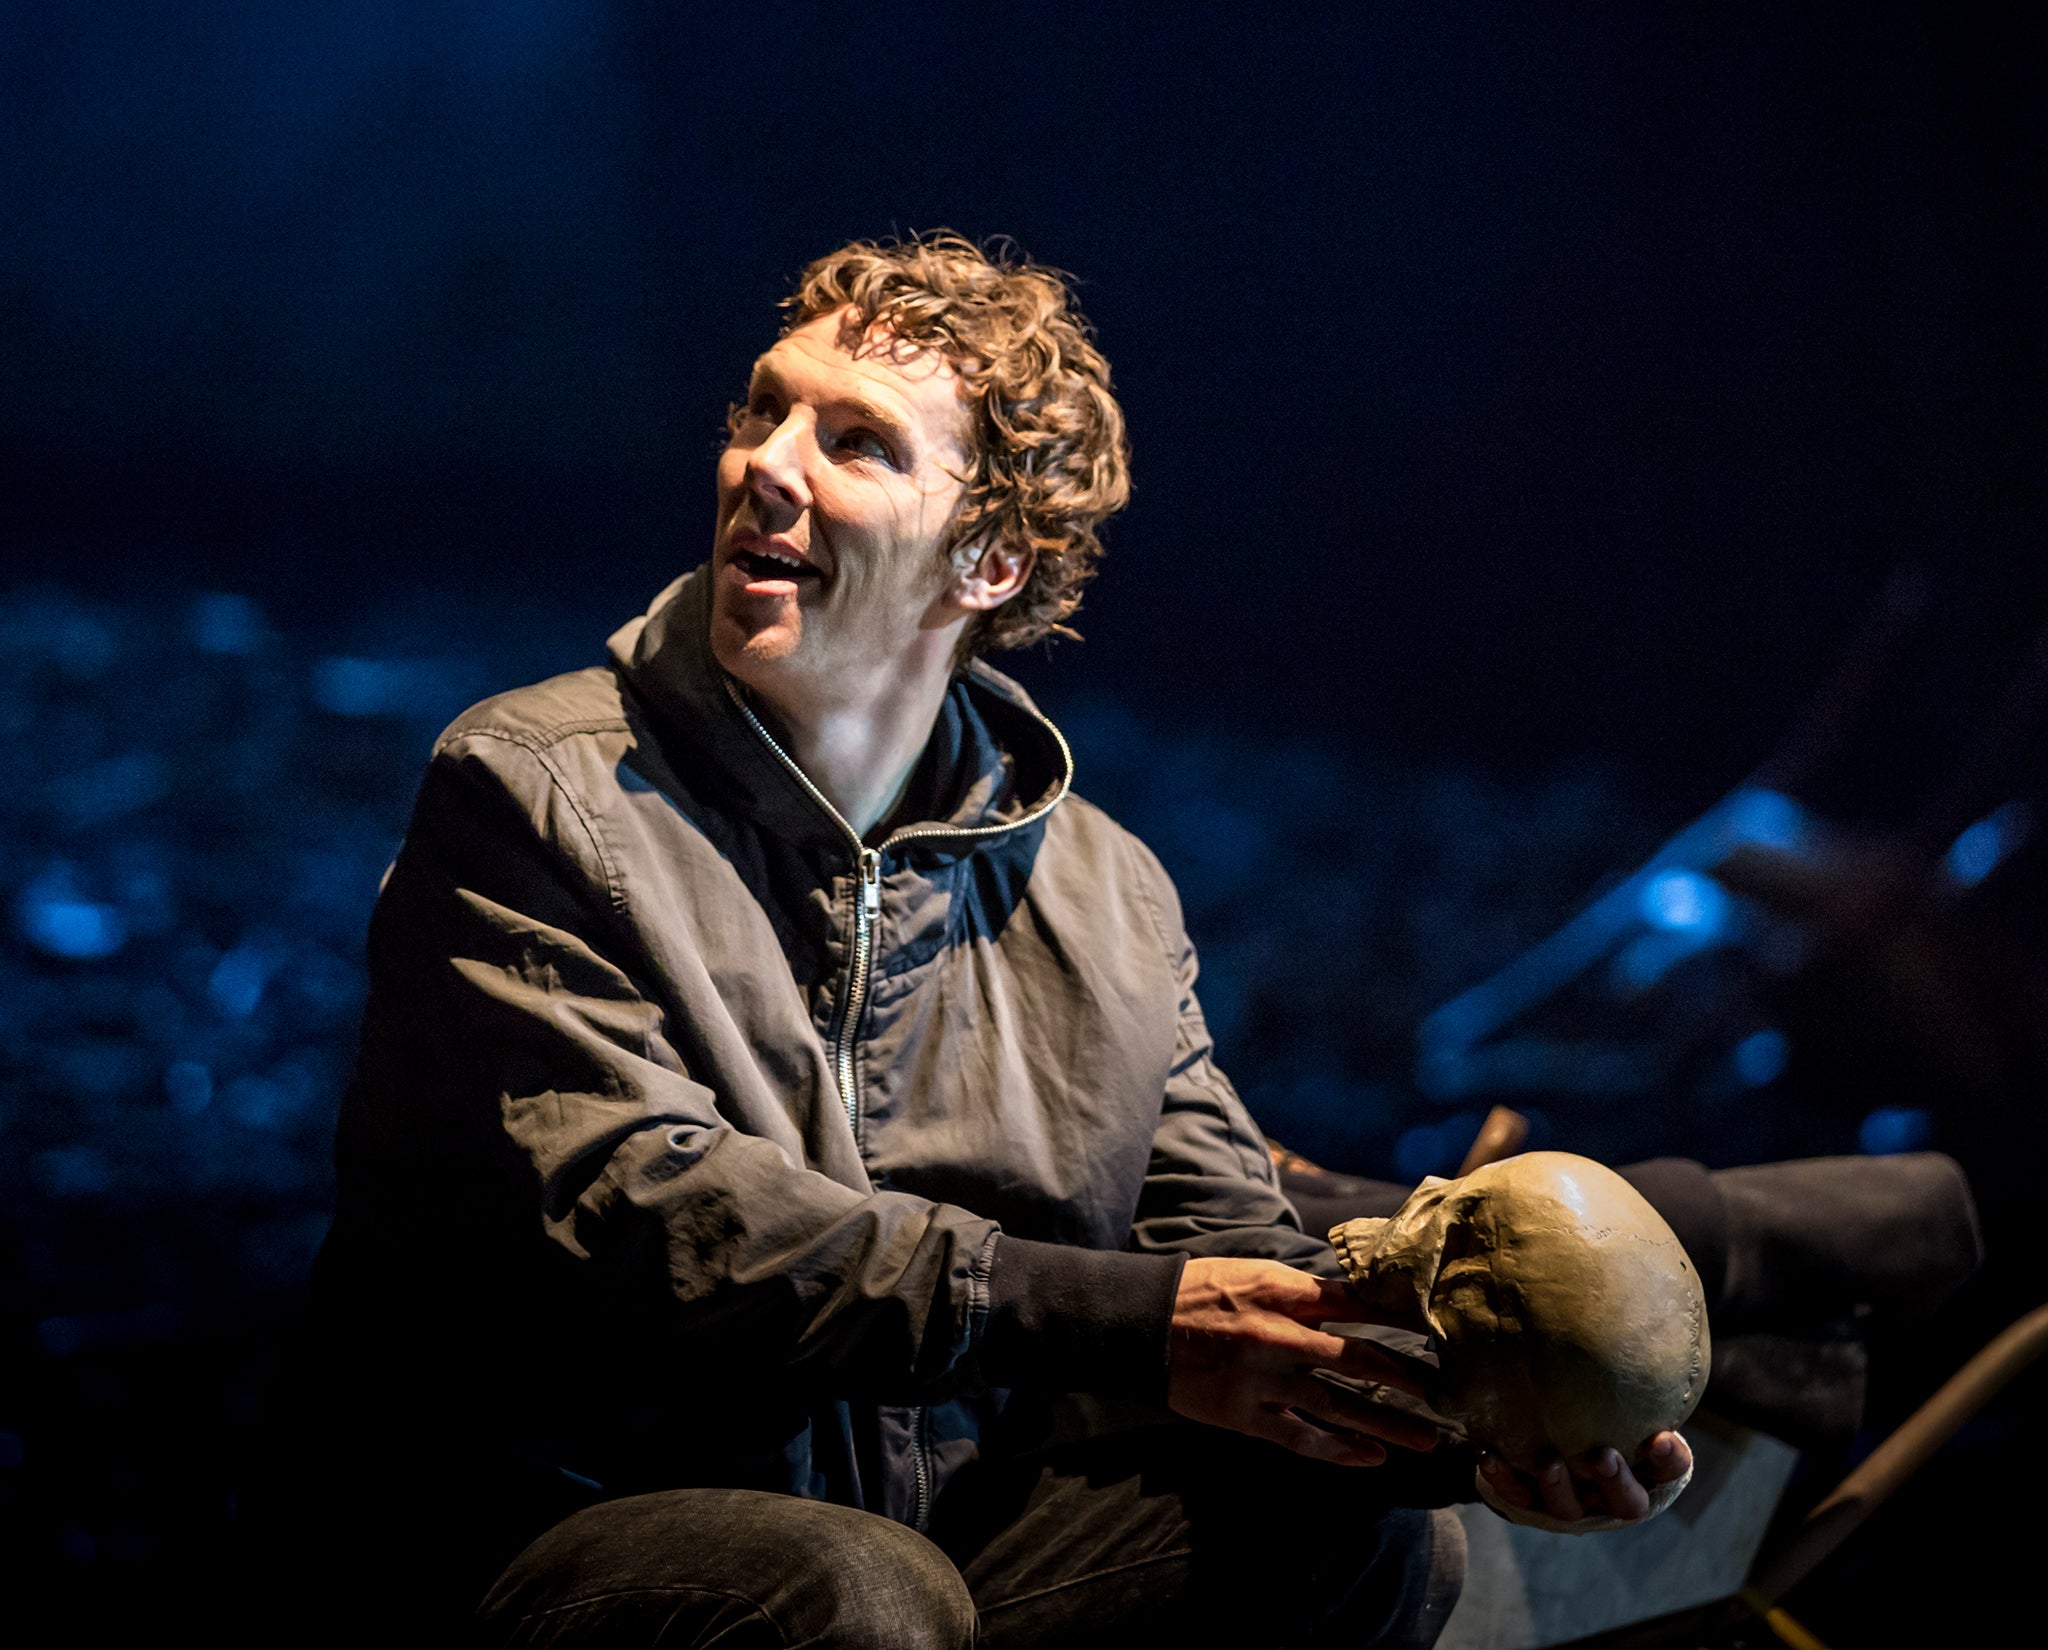 Another NT Live film success was 'Hamlet' starring Benedict Cumberbatch